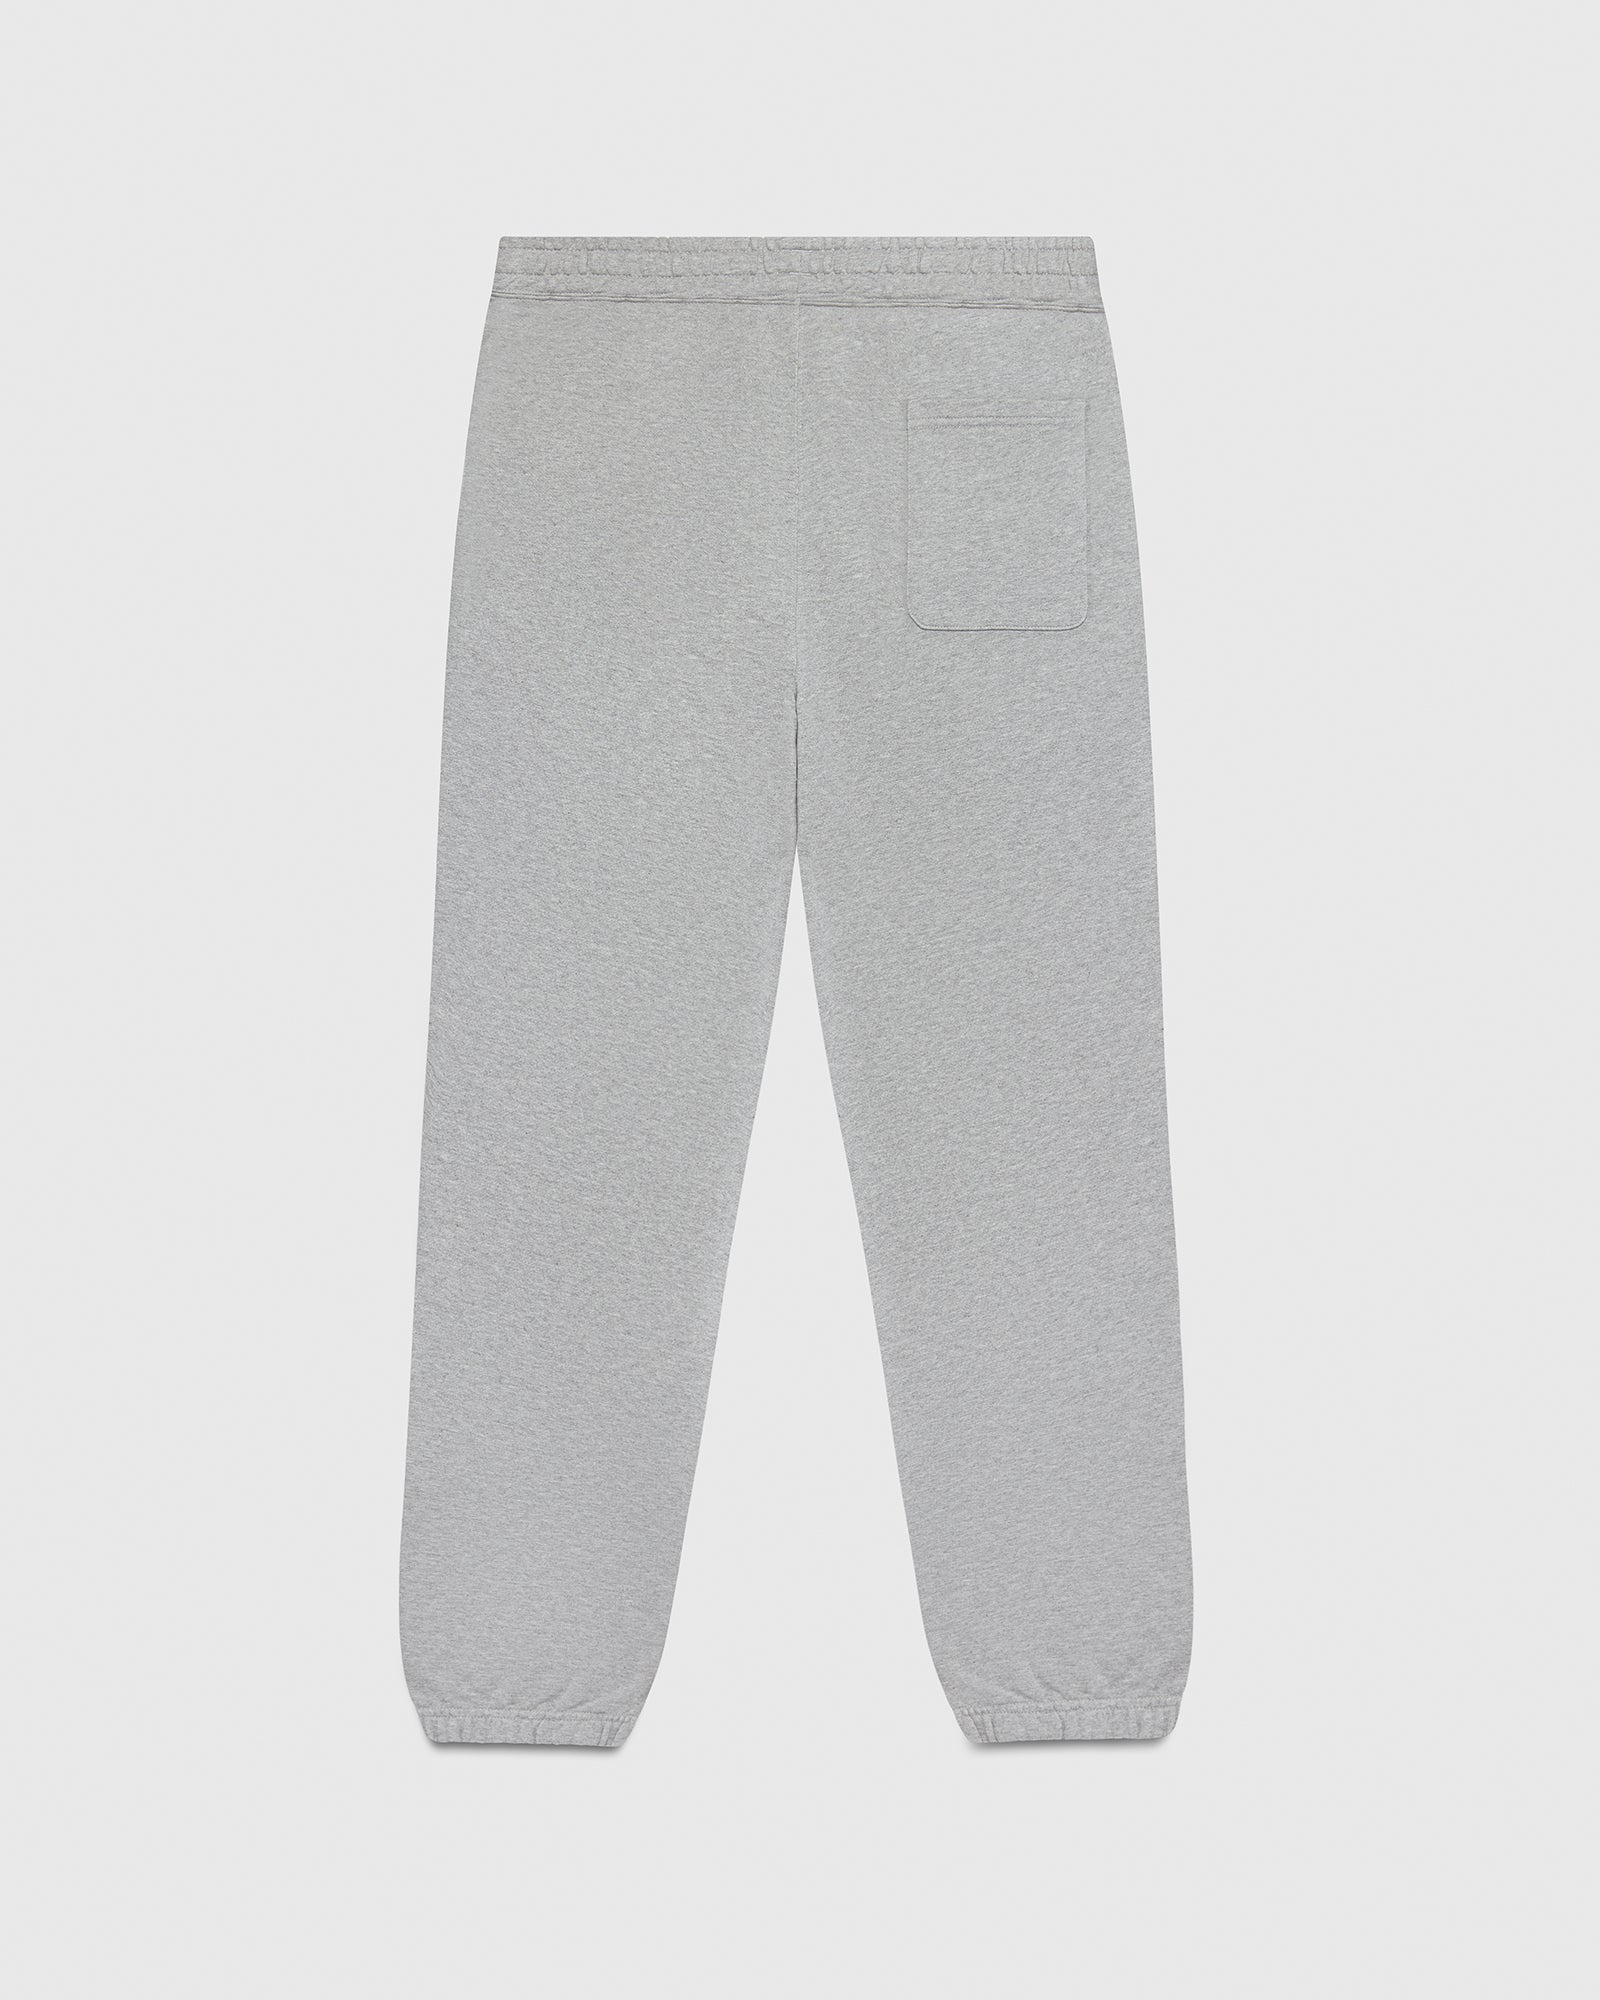 Classic Relaxed Fit Sweatpant - Heather Grey